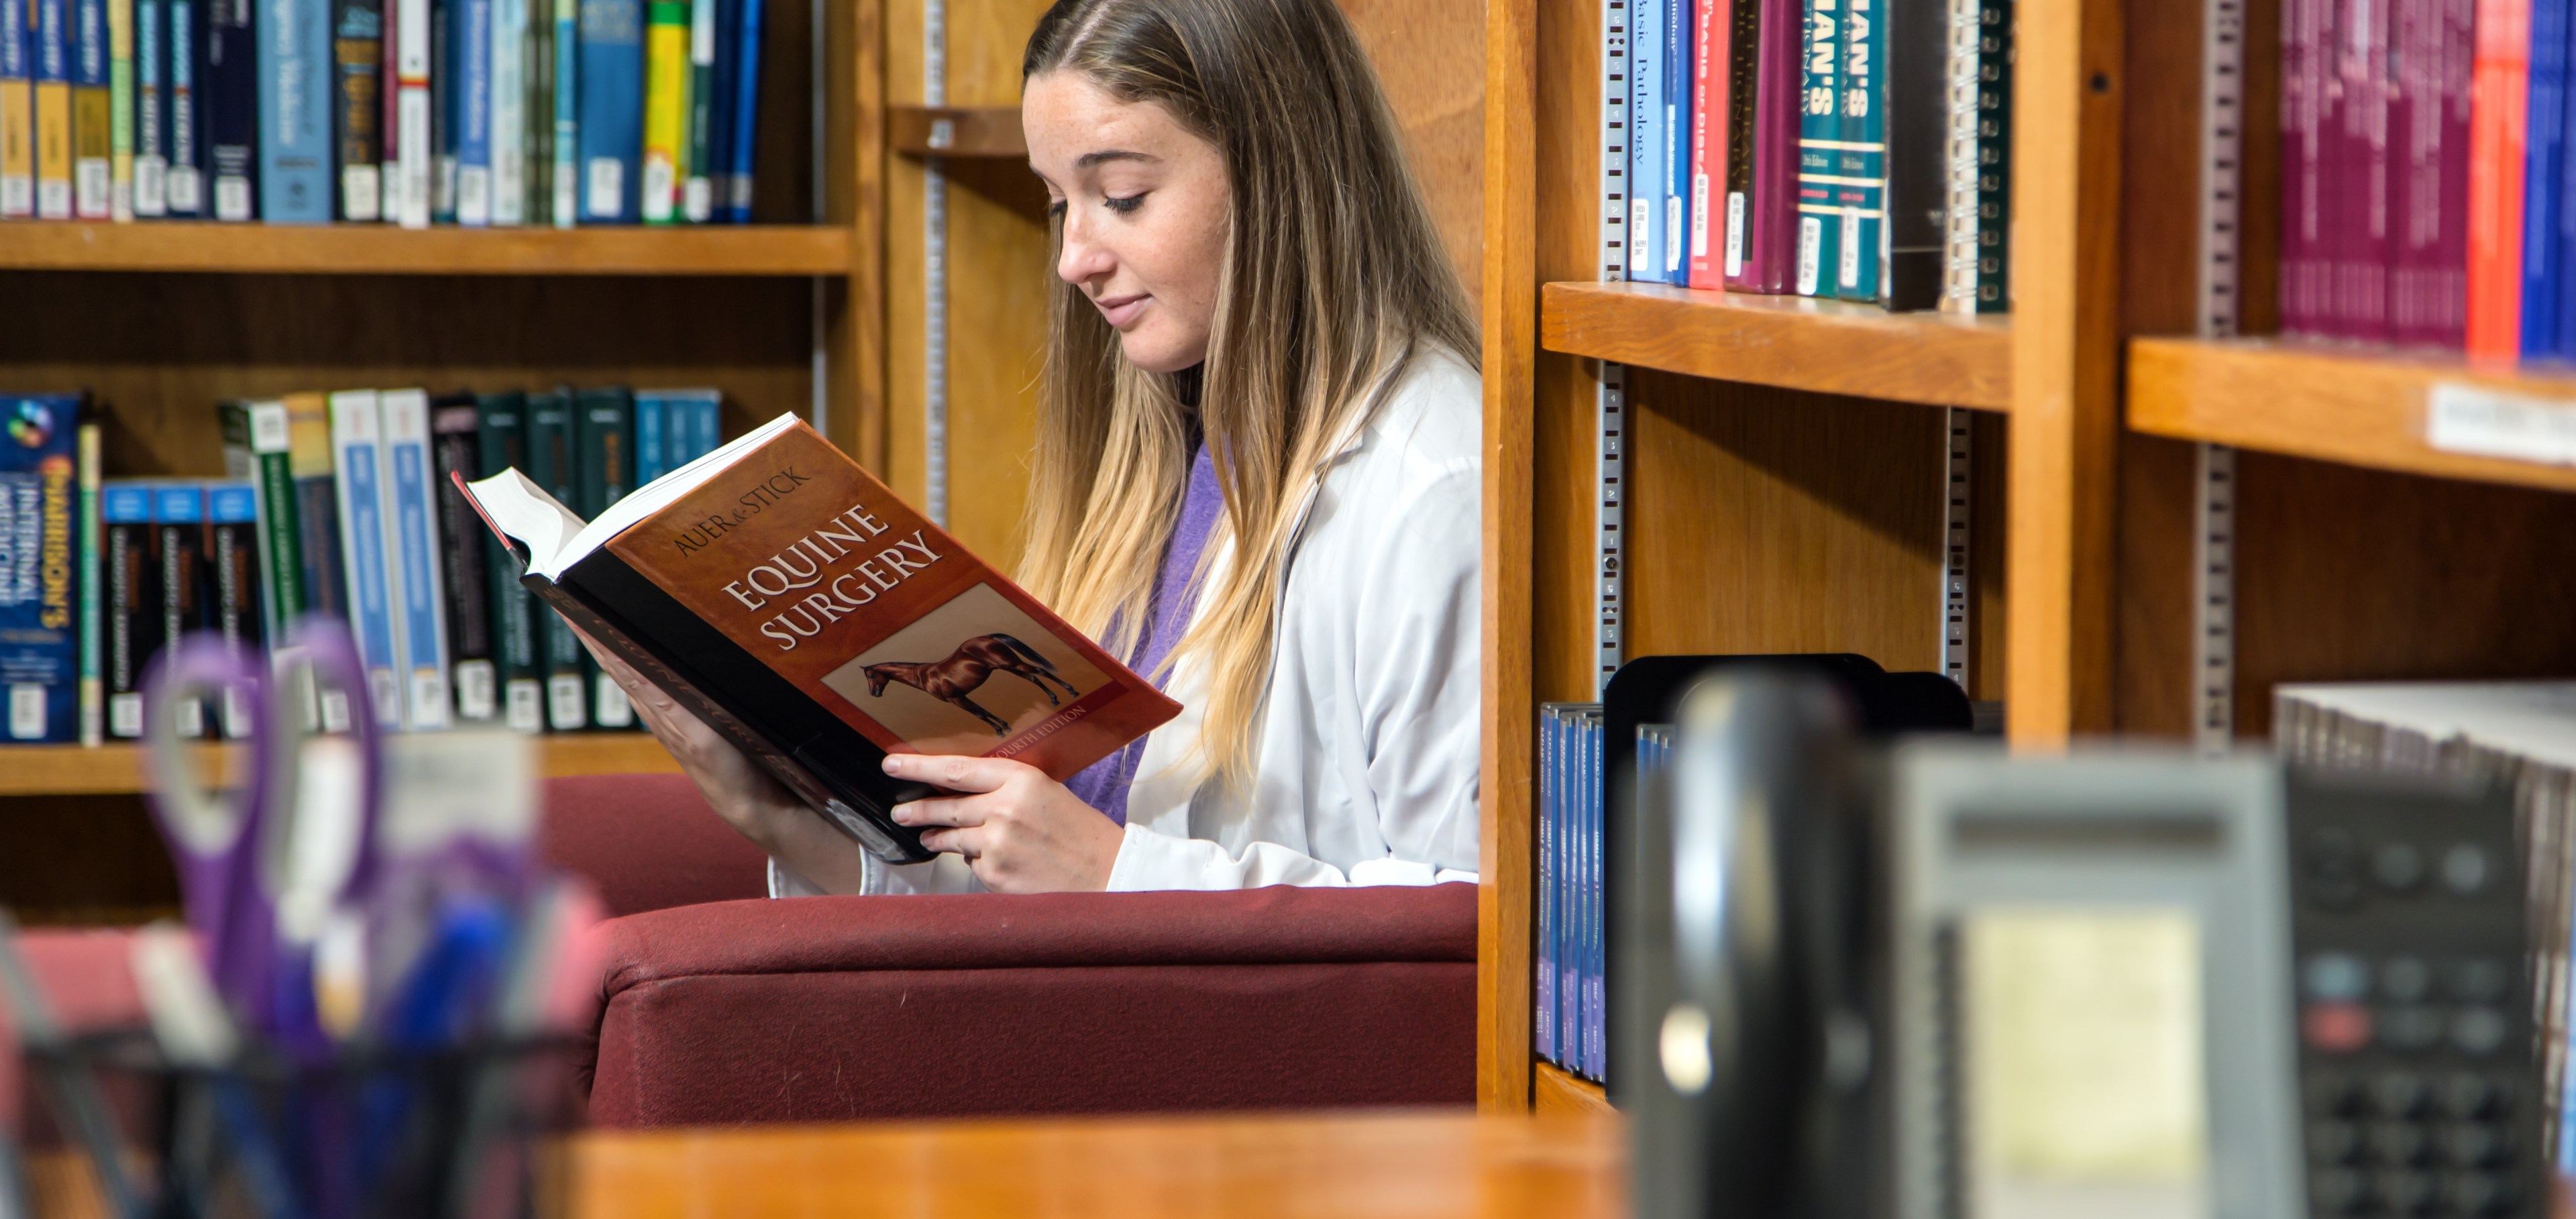 SMU Veterinary student studying in library